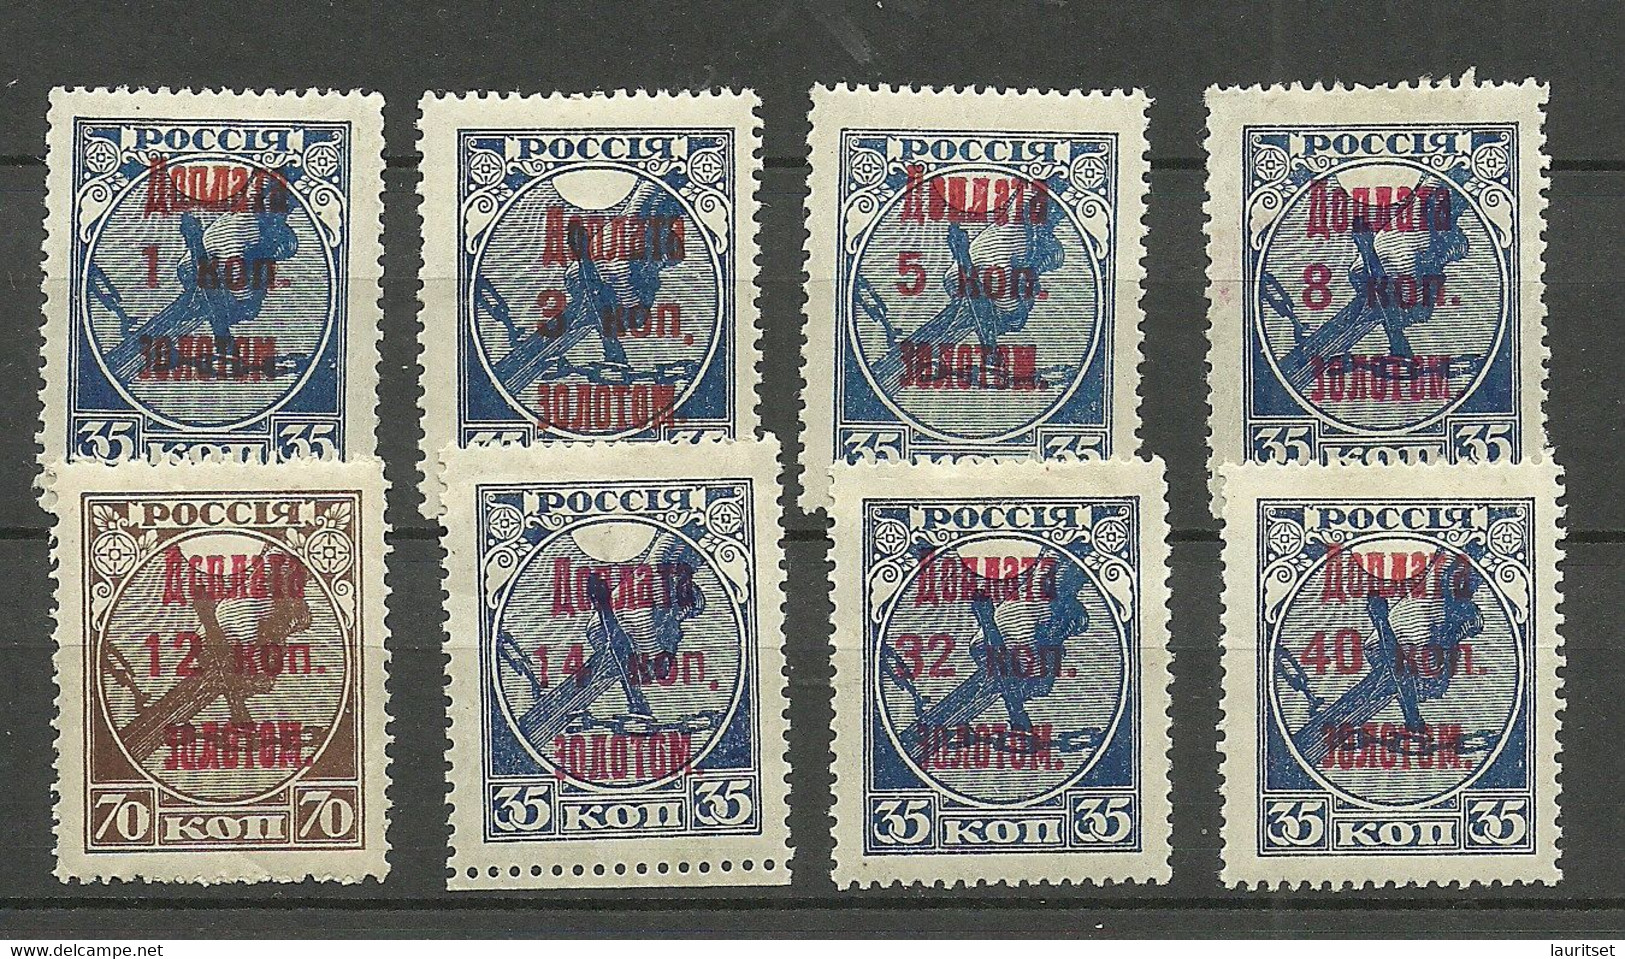 RUSSLAND RUSSIA 1924/25 Postage Due Portomarken = 8 Stamps From Set Michel 1 - 9 MNH/MH Incl. Variety Set Off Of OPT - Postage Due